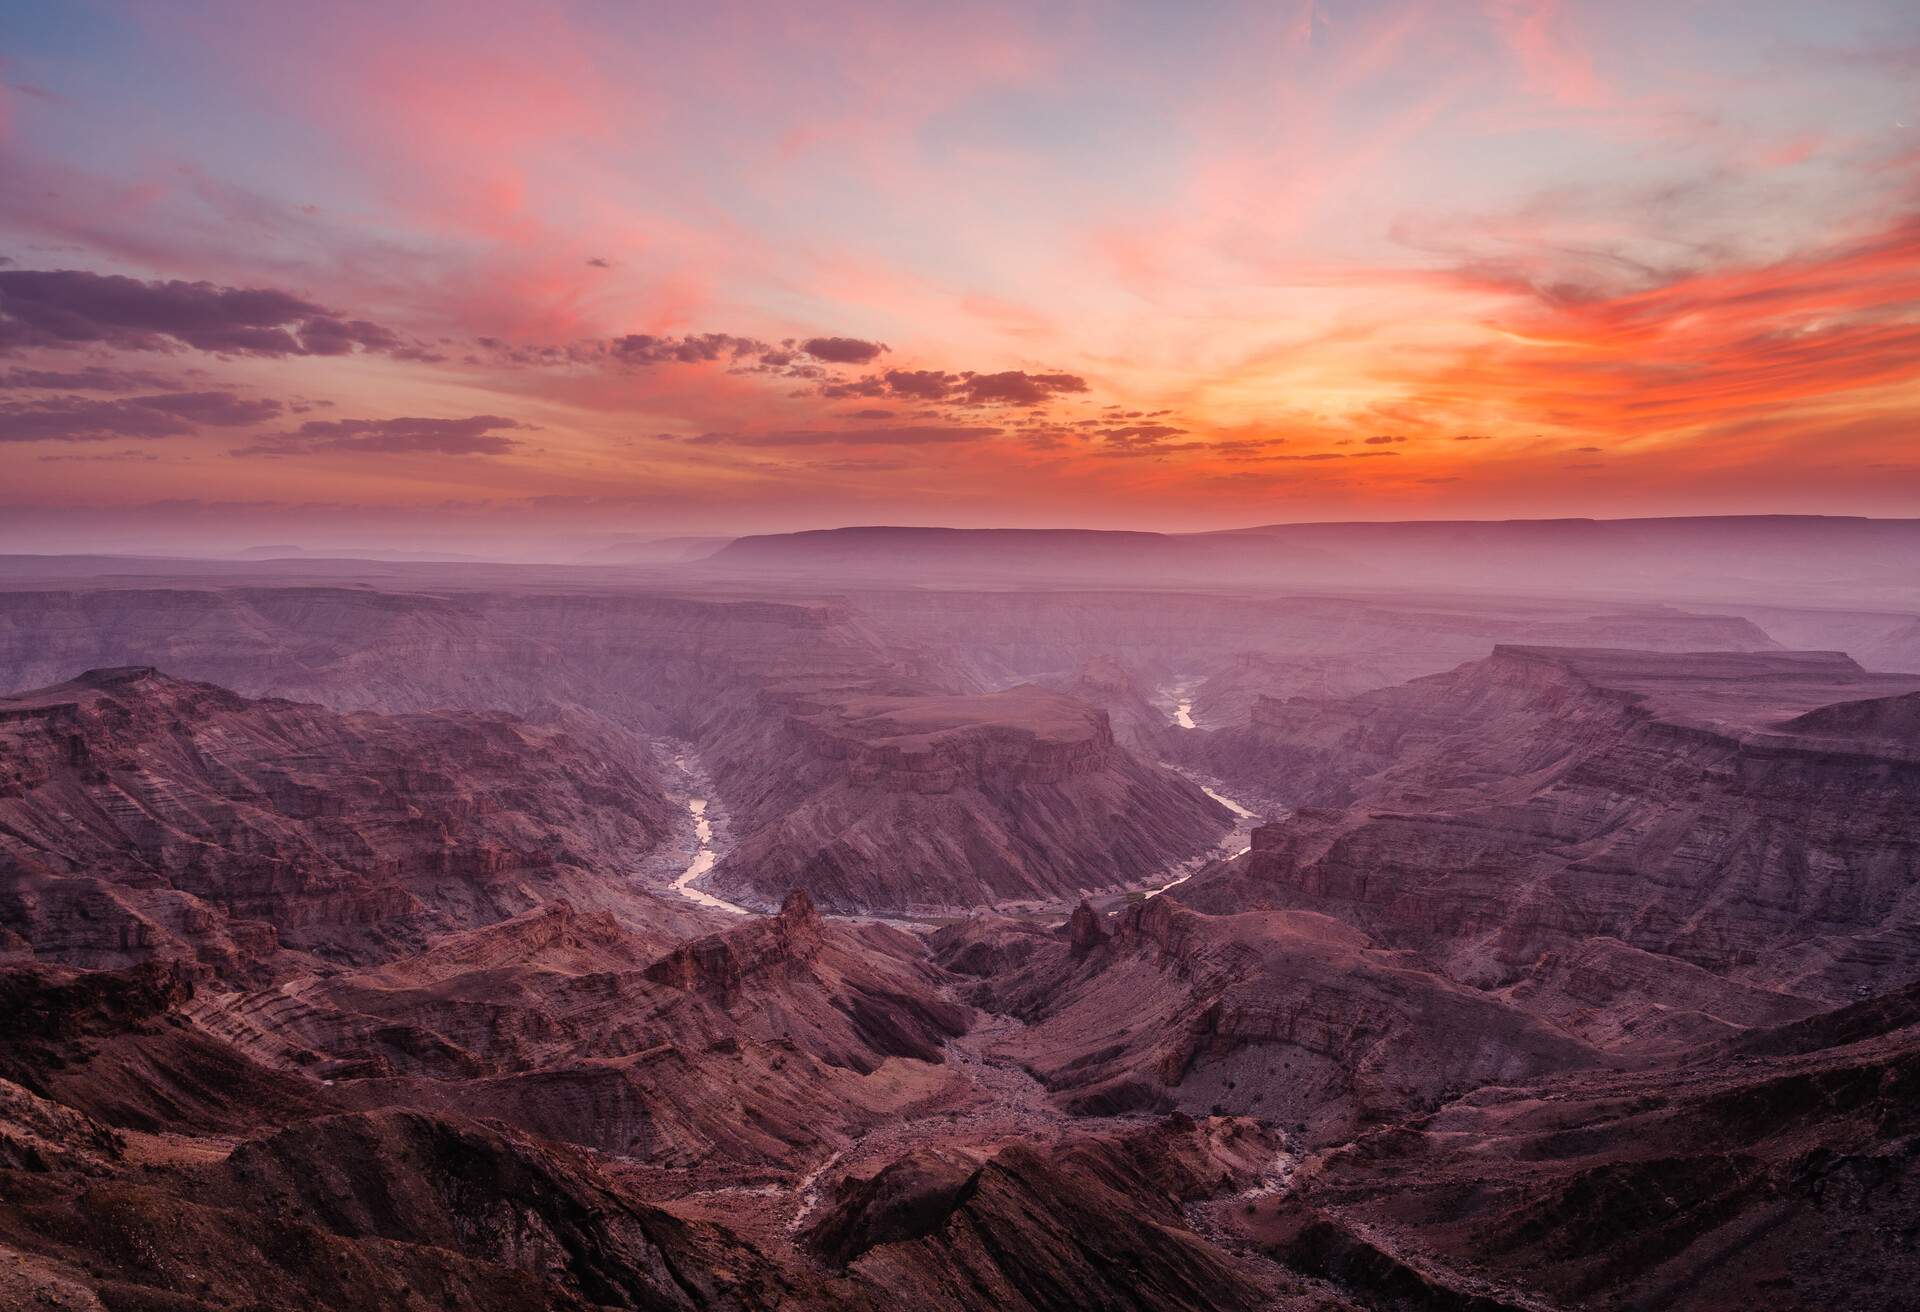 A sunset over the Fish River Canyon in Namibia